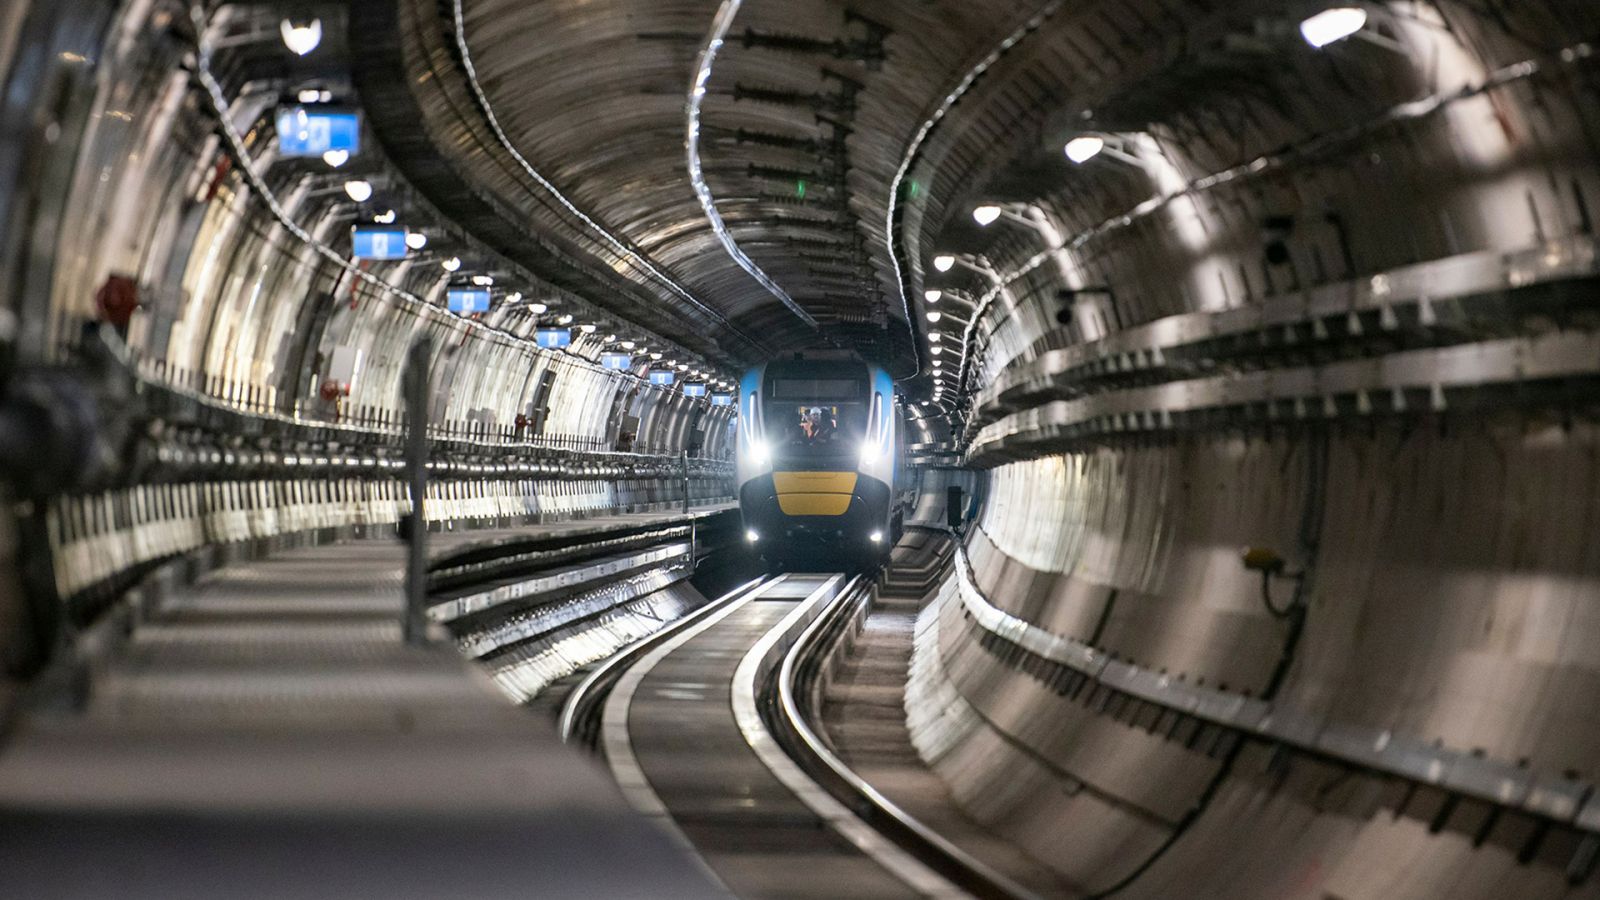 The front of a blue and yellow train can be seen inside a concrete train tunnel.